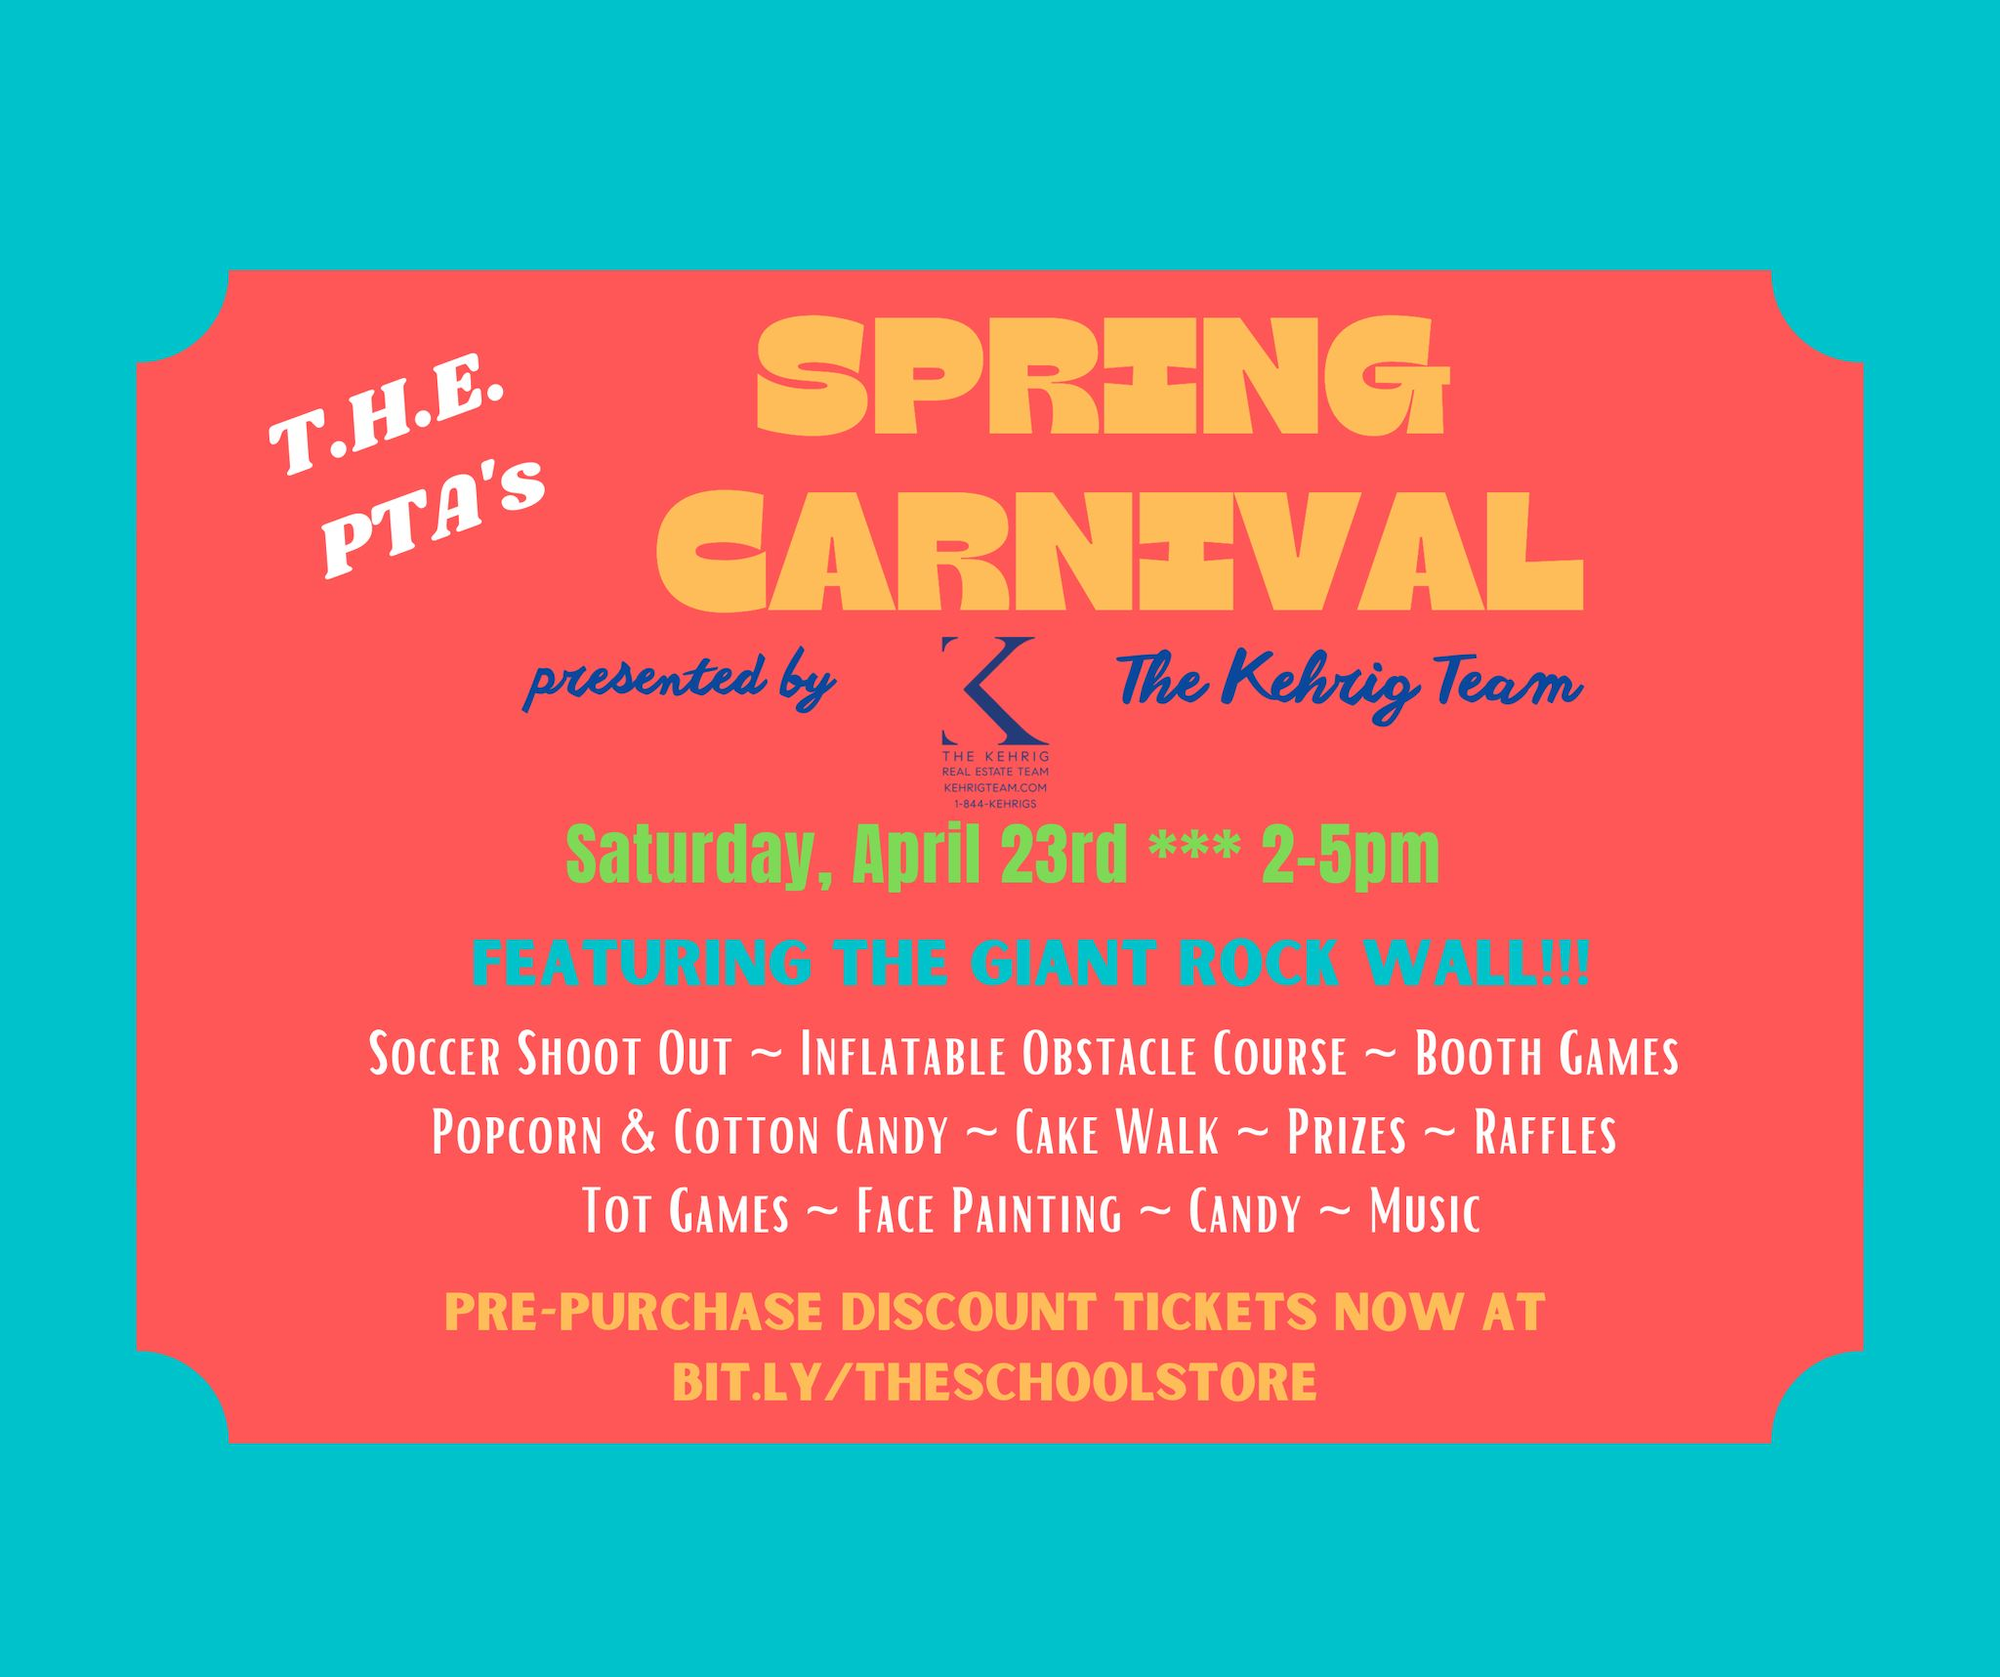 T.H.E. PTA's Spring Carnival presented by The Kehrig Team